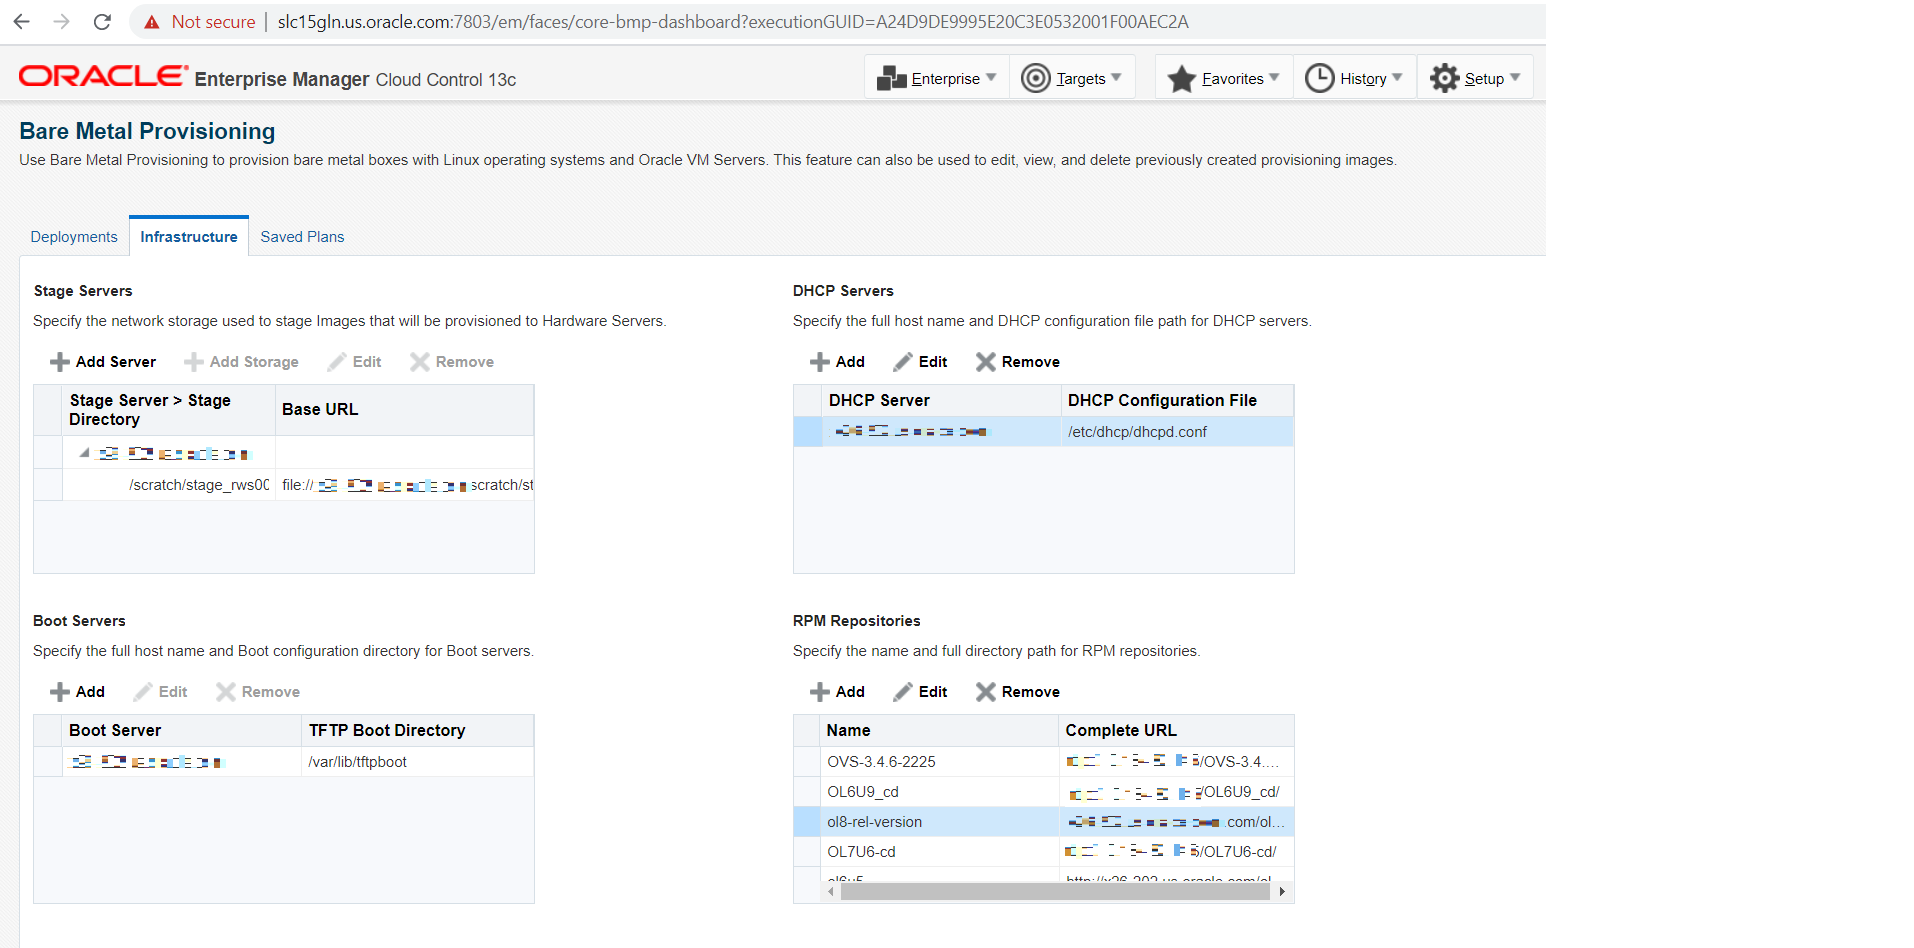 Infrastructure tab for Bare Metal Provisioning section